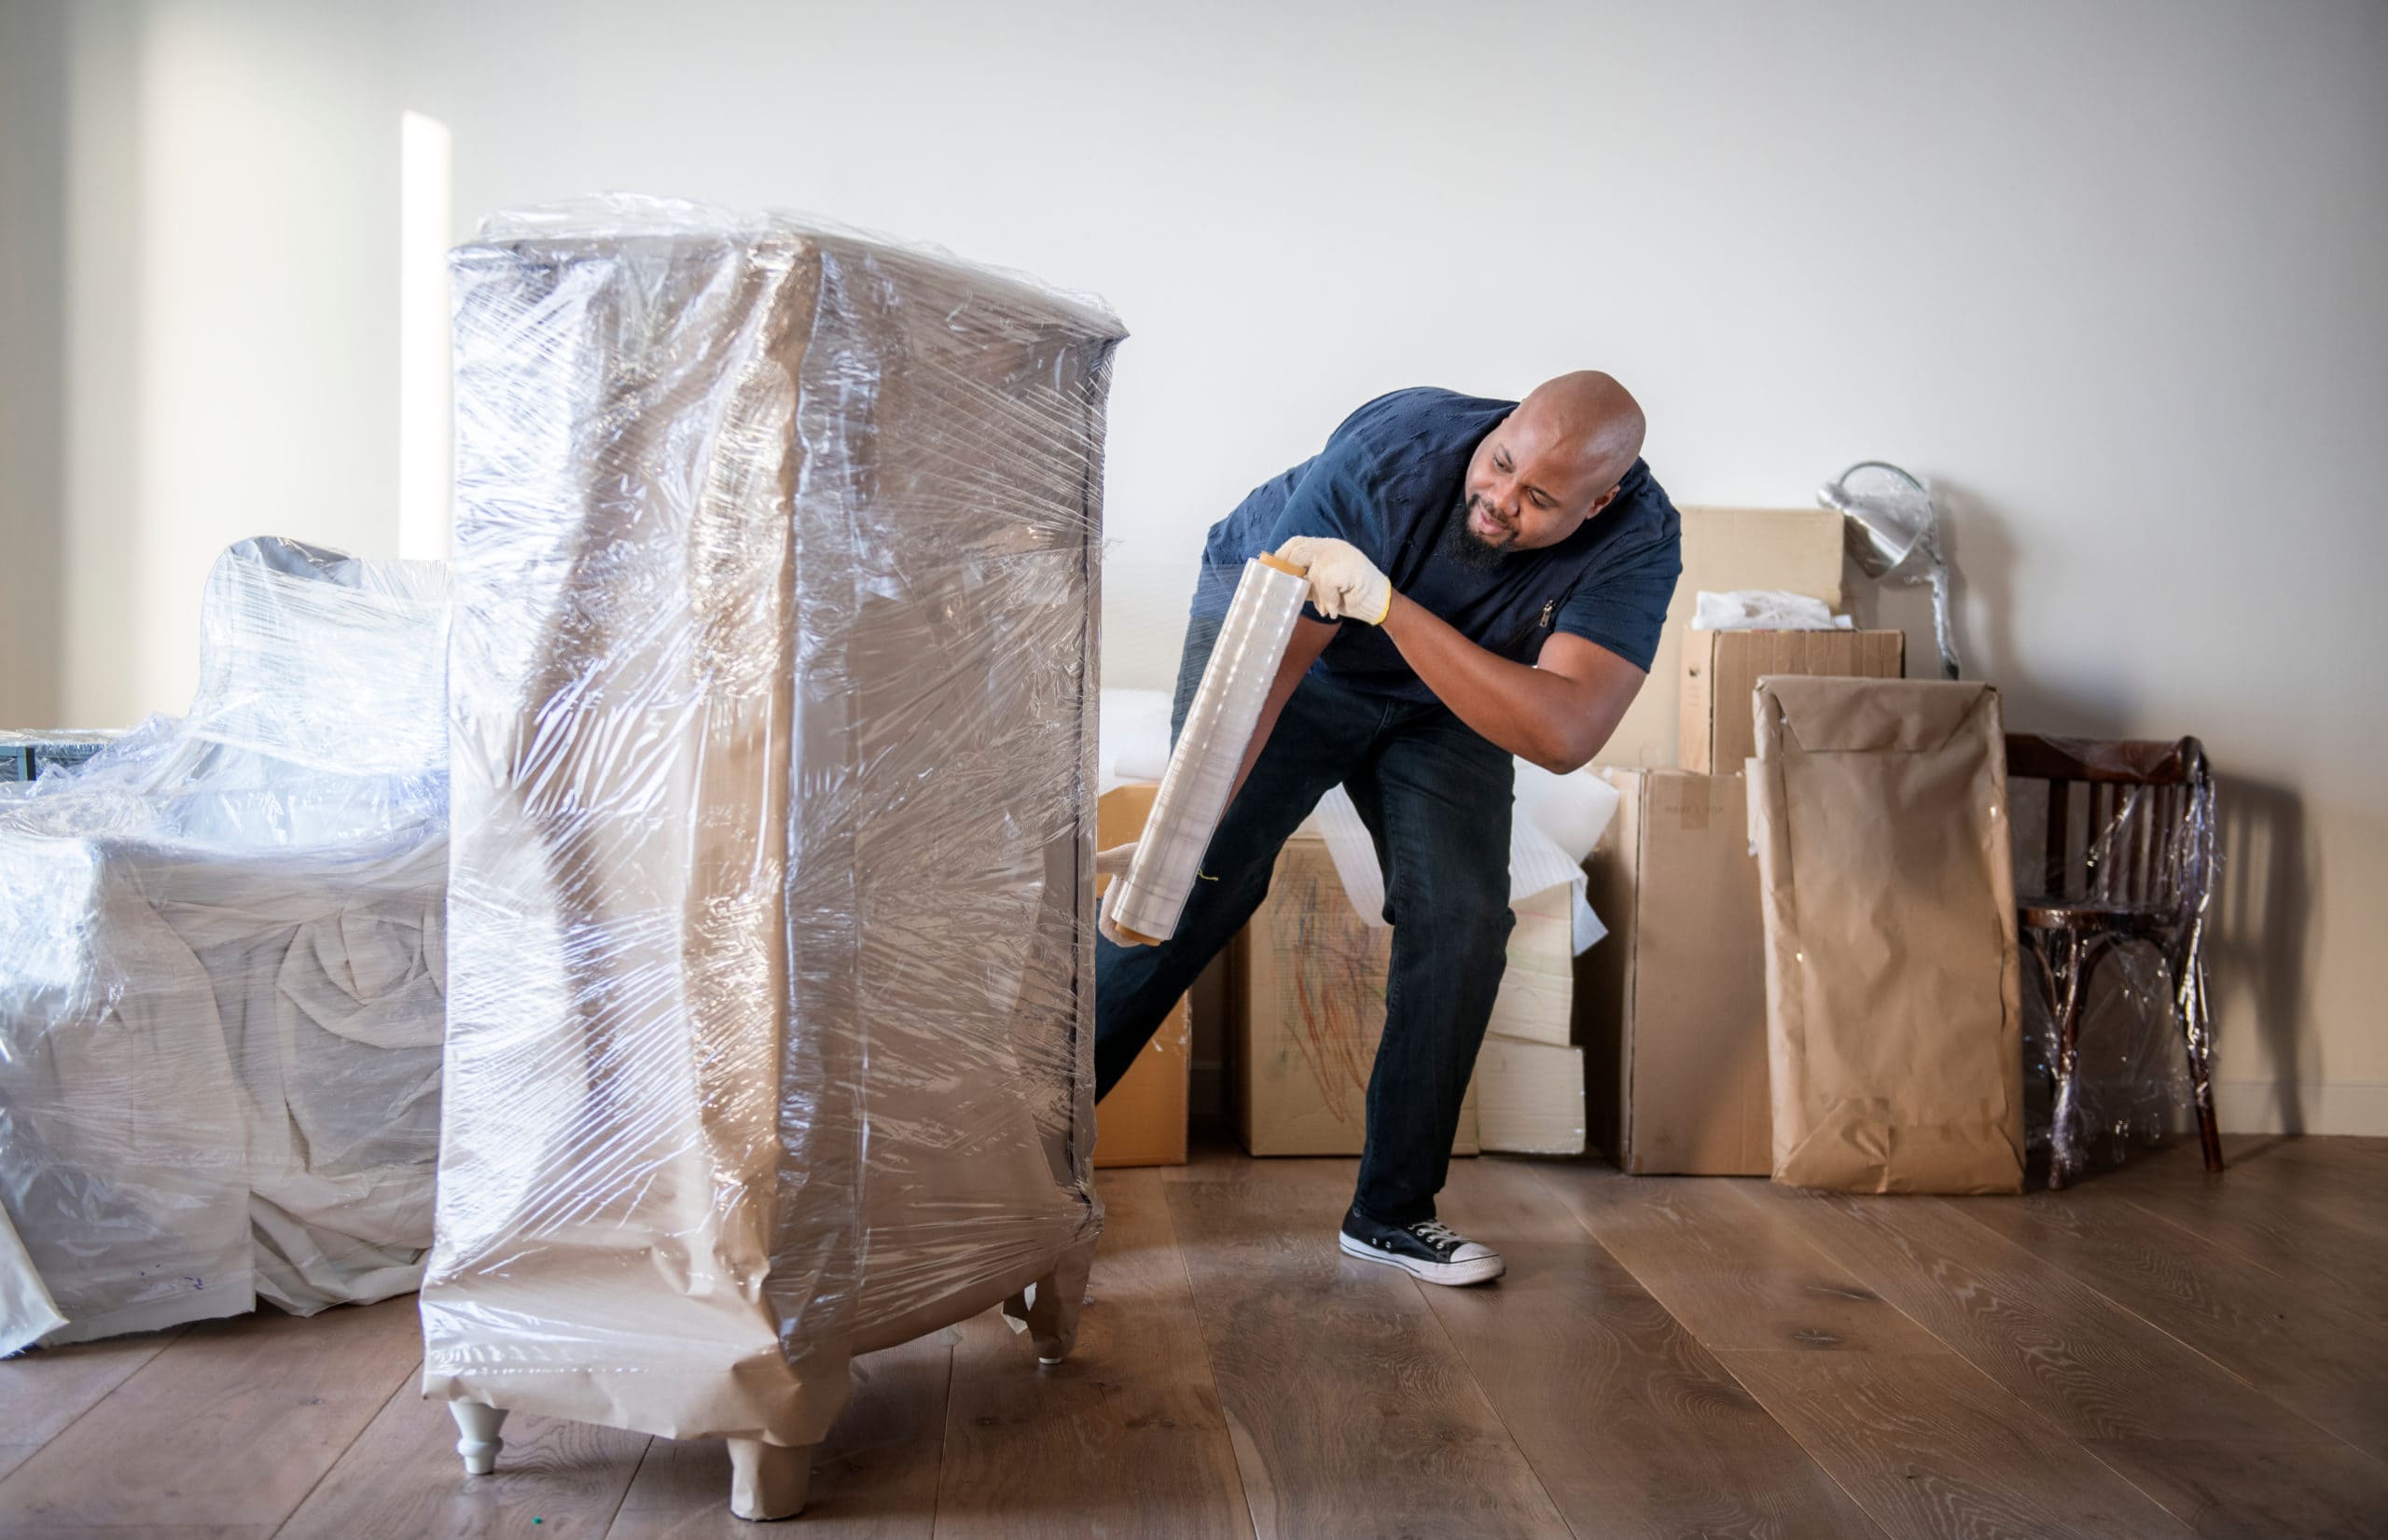 How to Protect Your Furniture When Moving